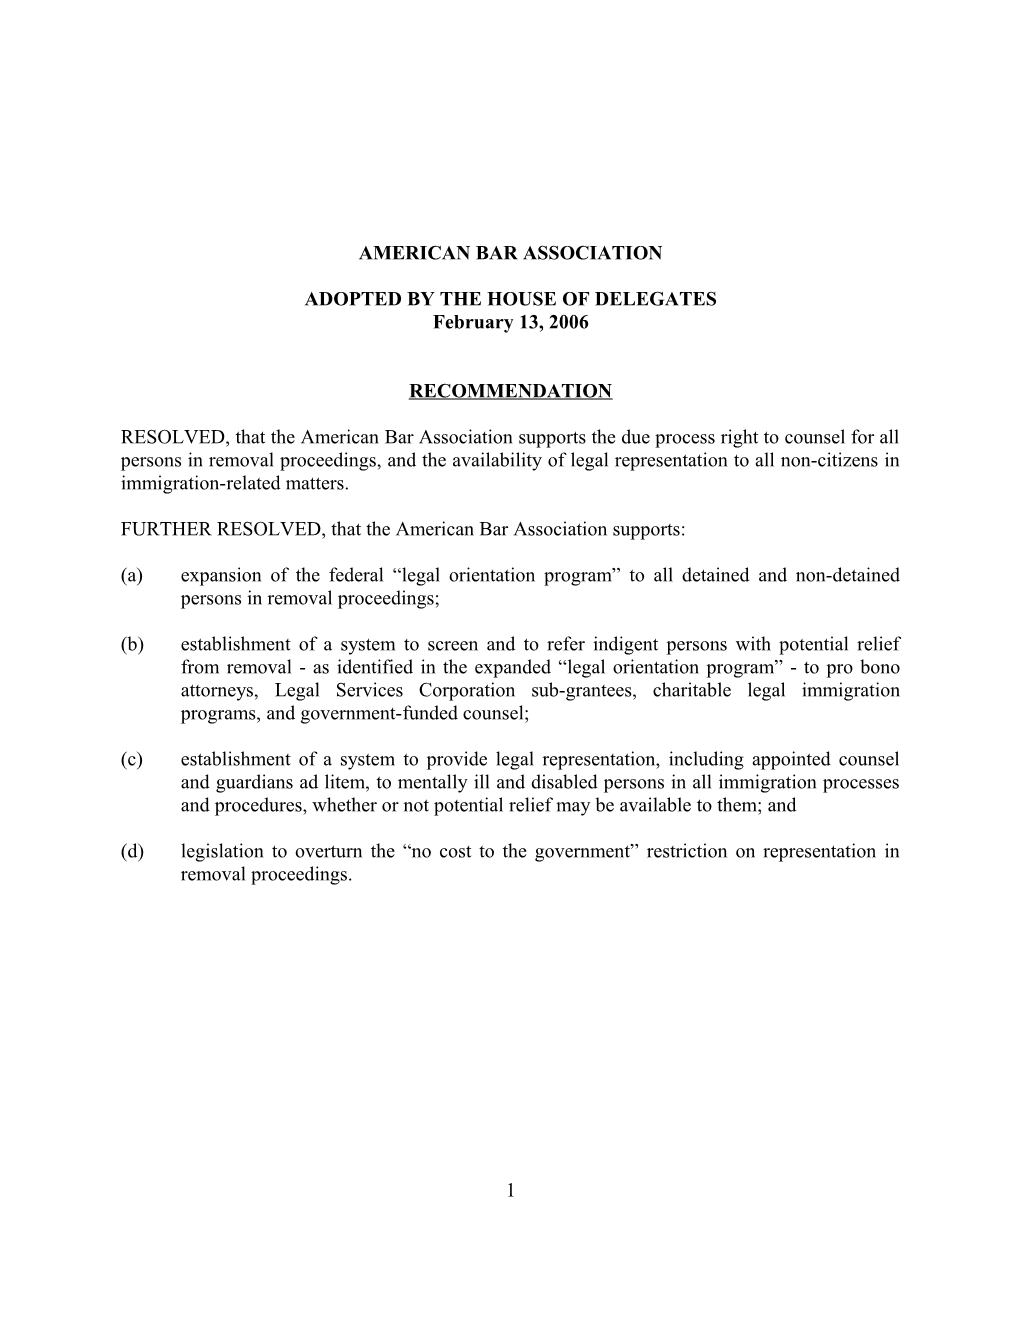 Right to Counsel Resolution